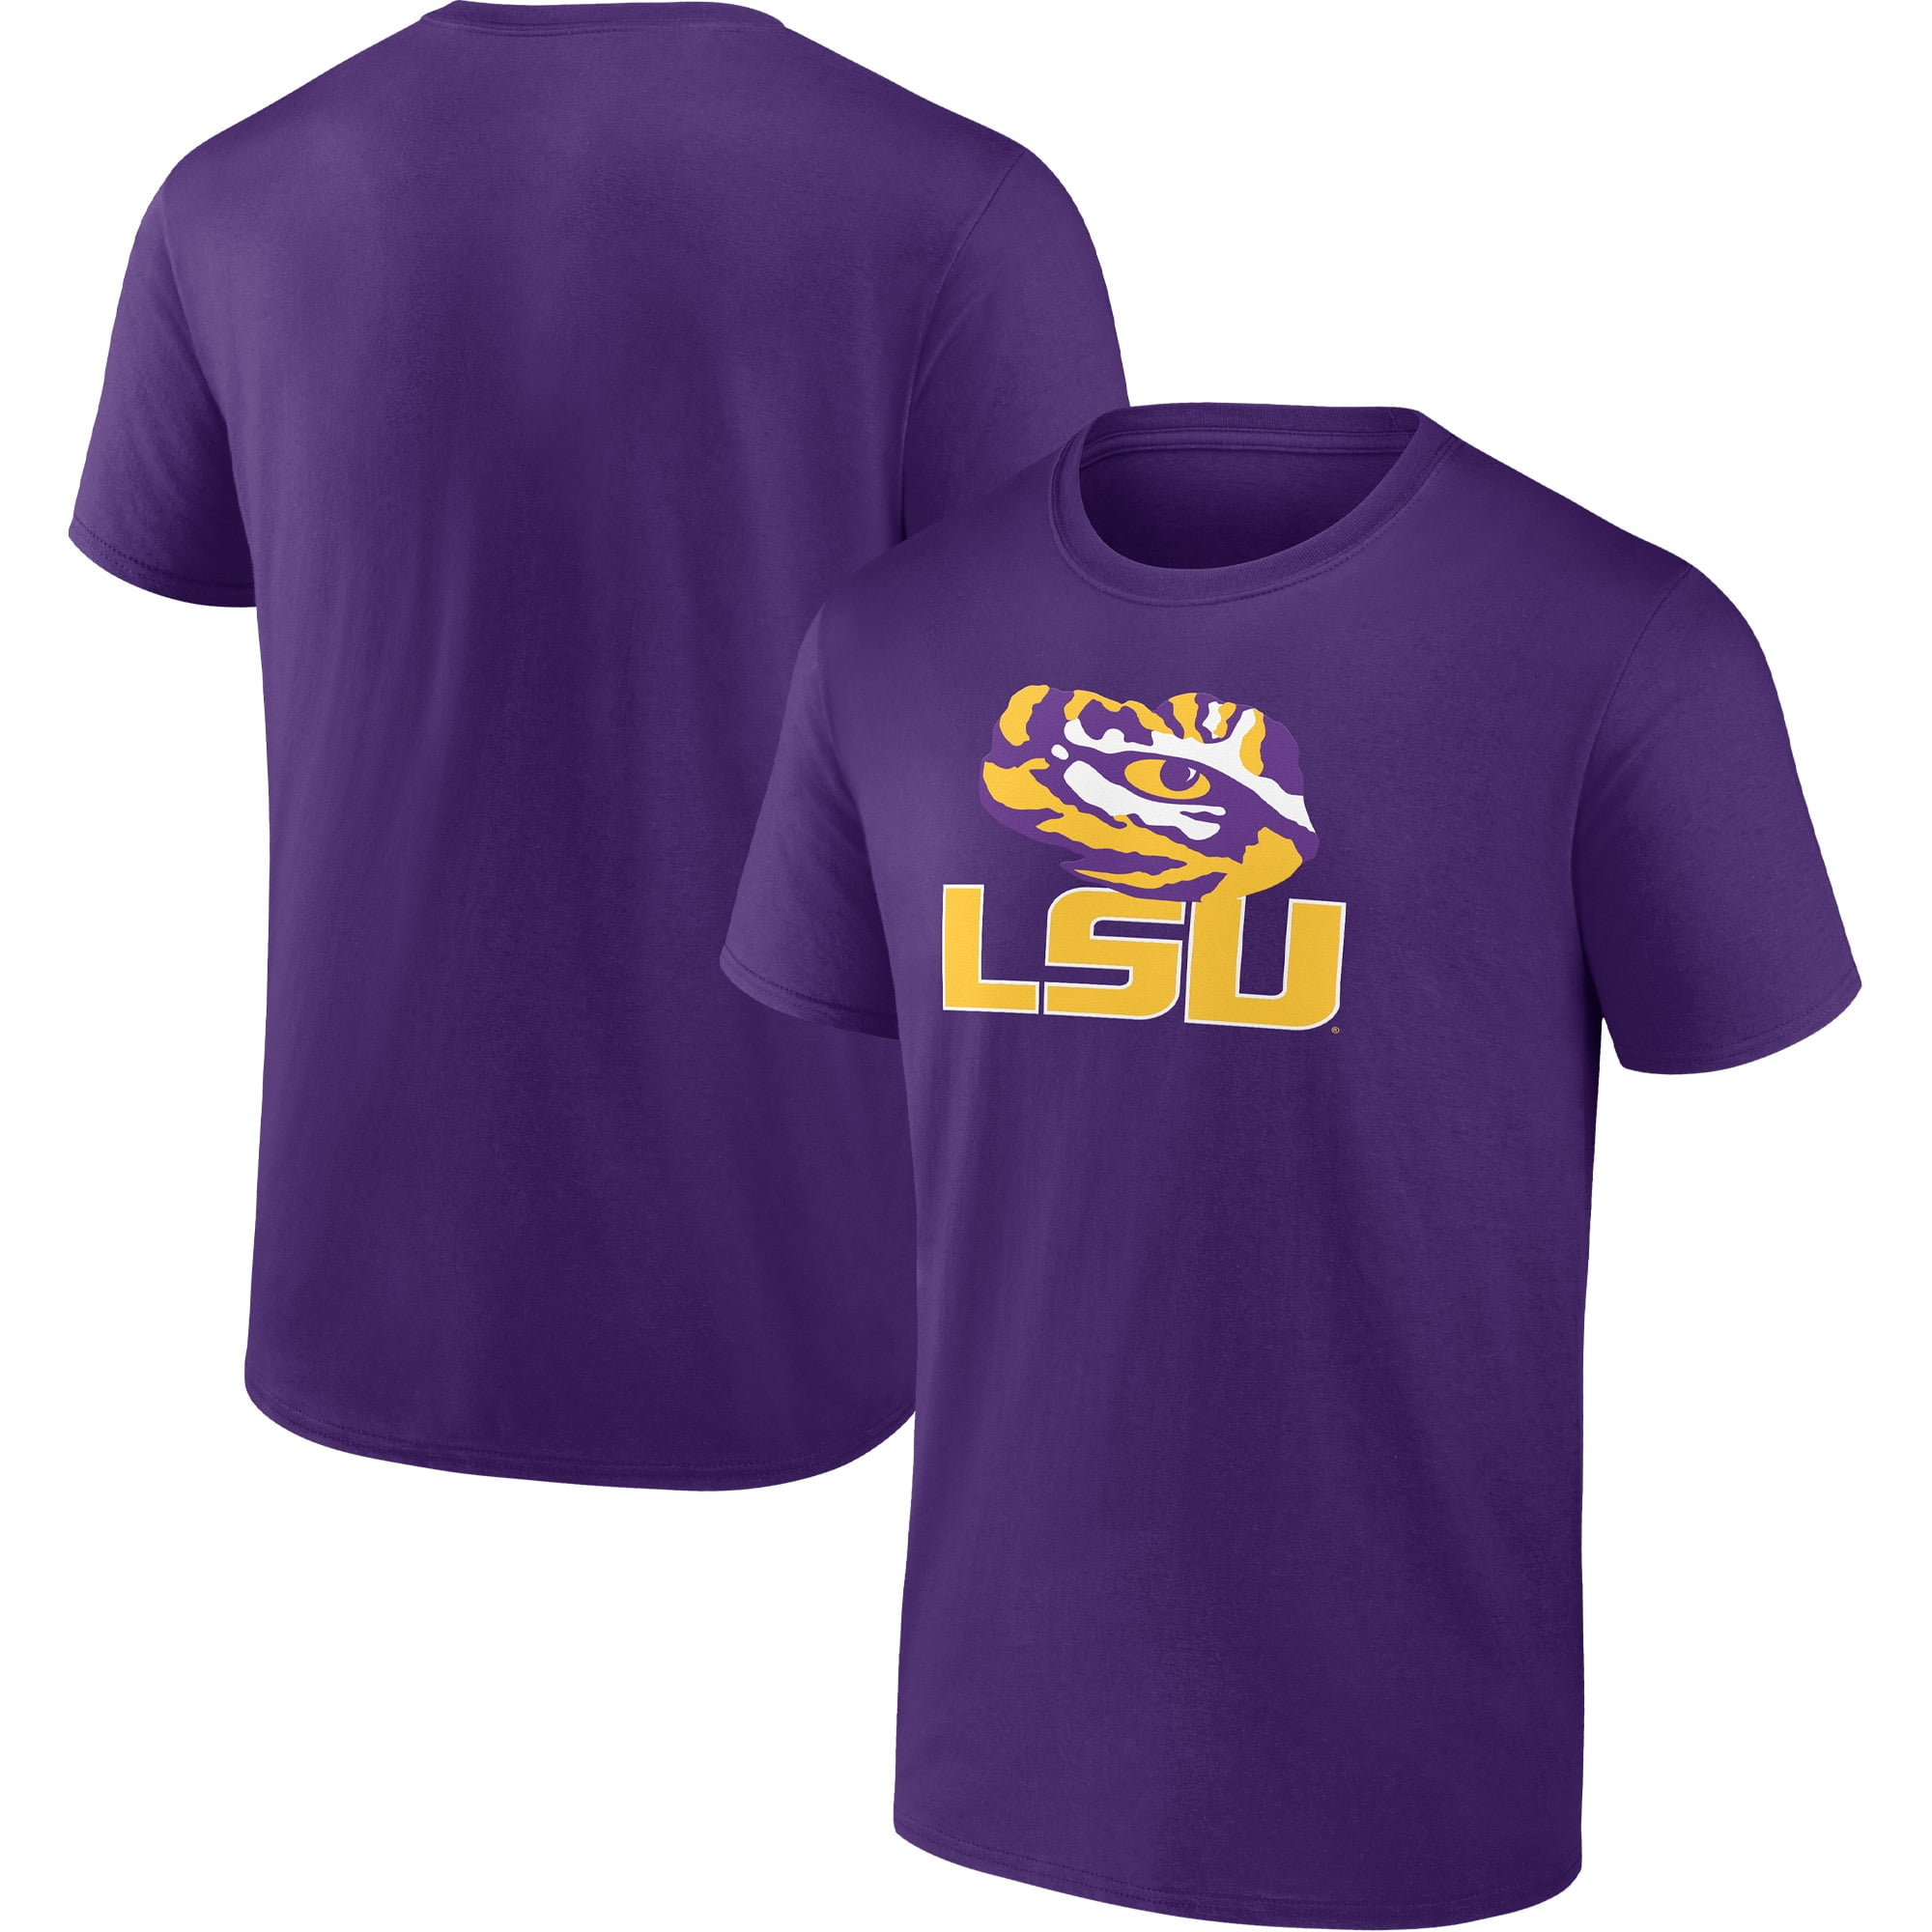 NCAA Yall T Shirts Up to 2X and 3X Multiple Universities Available 